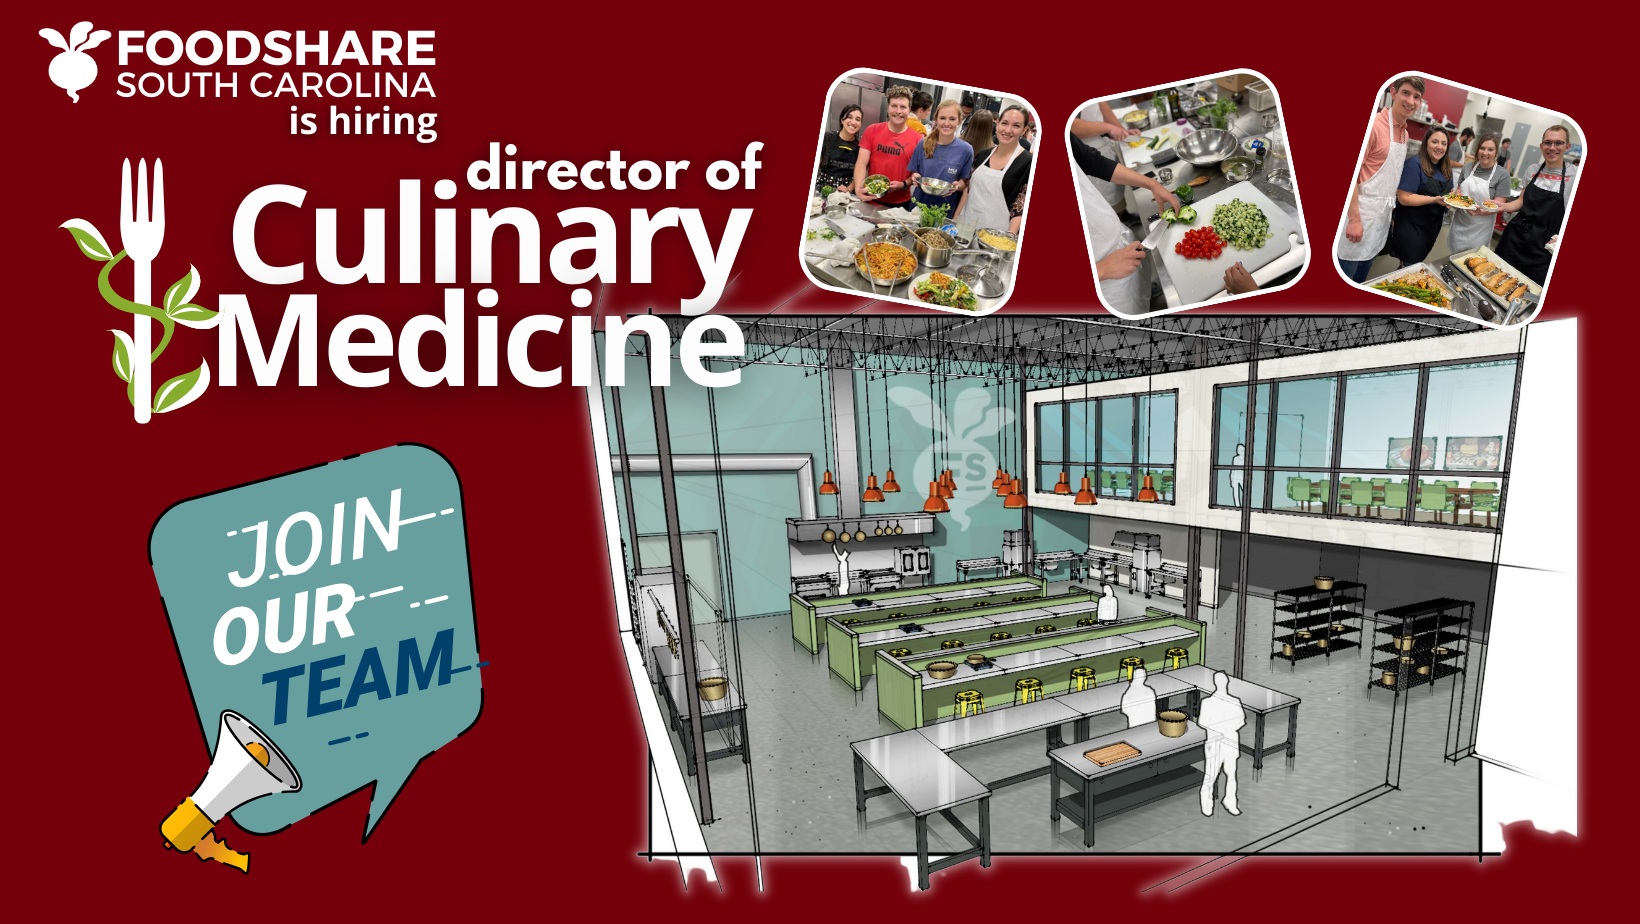 FoodShare South Carolina is Seeking Applicants for Director of Culinary Medicine